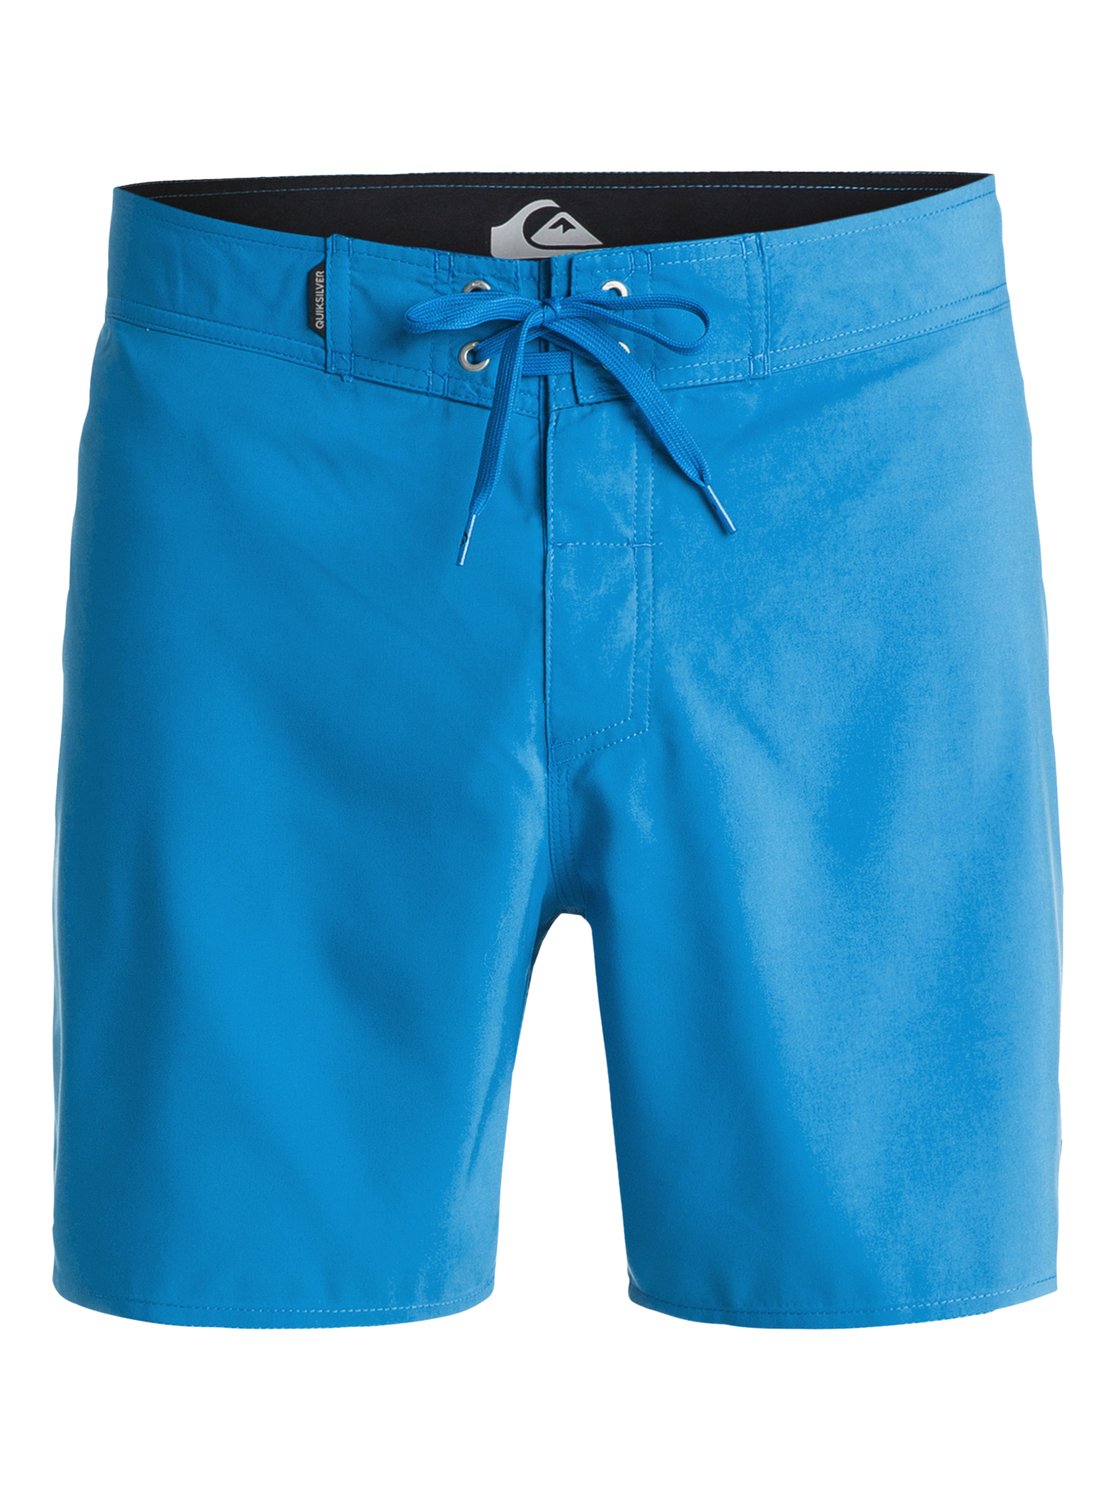 Everyday Short 16 - Board Shorts - Quiksilver<br>